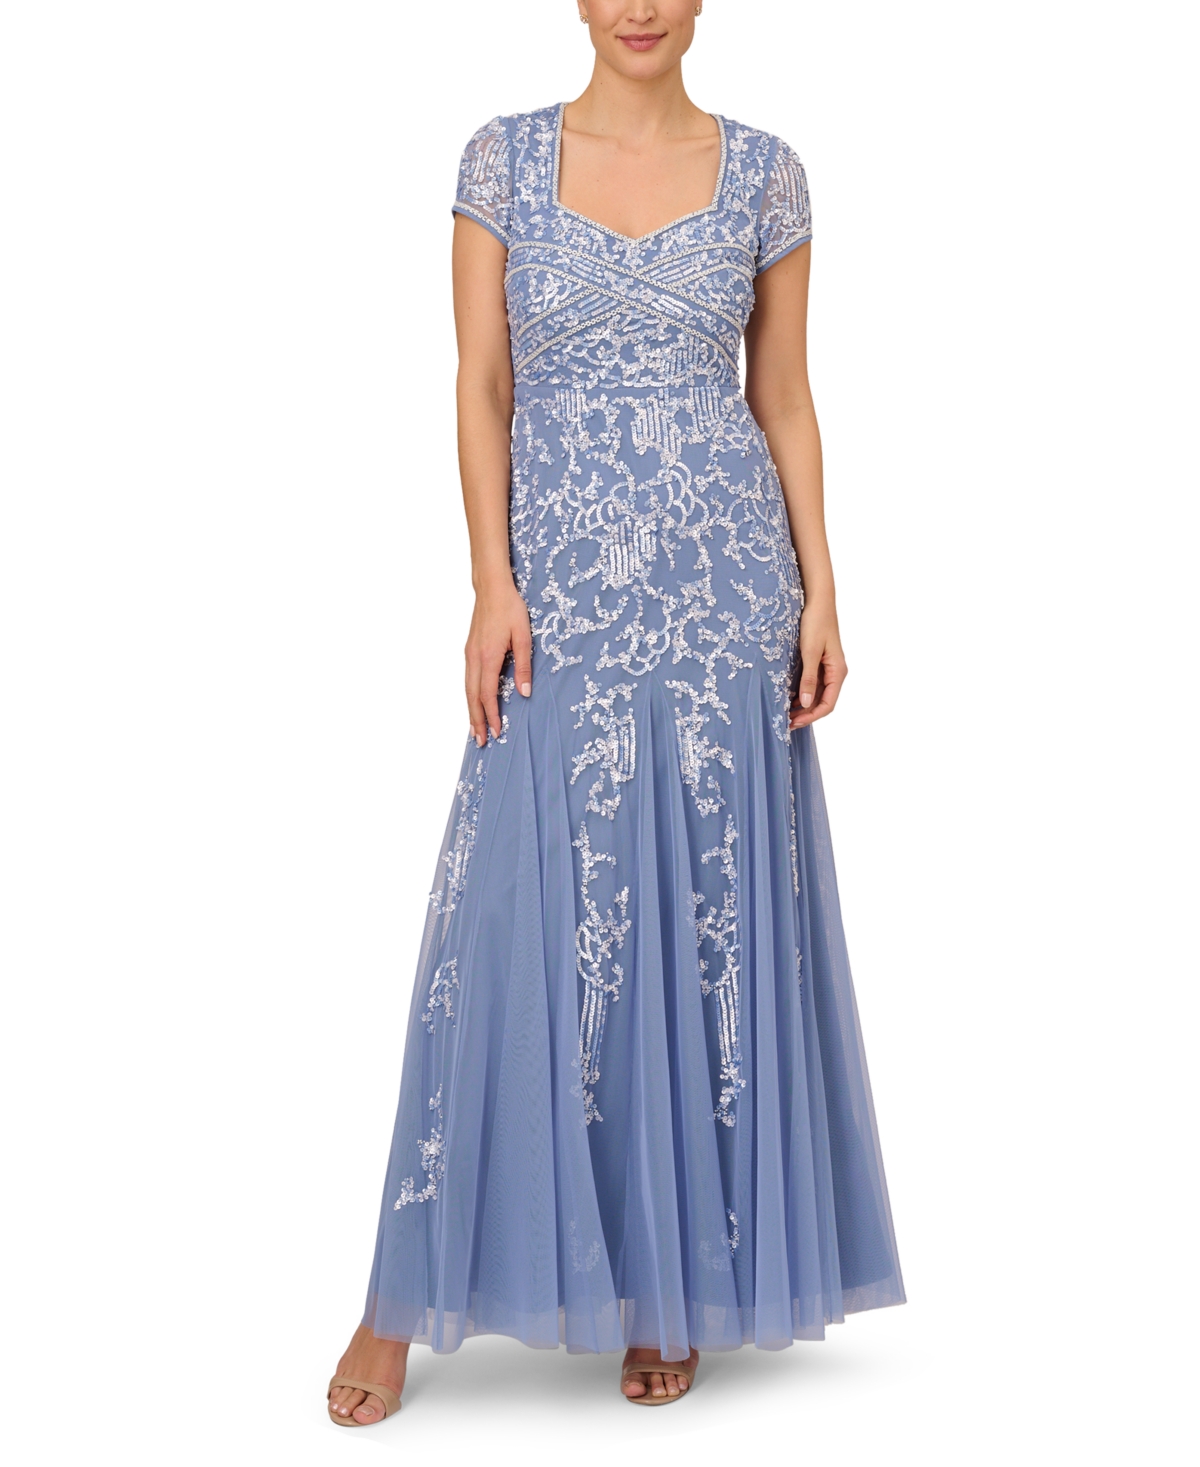 Best 1920s Prom Dresses – Great Gatsby Style Gowns Adrianna Papell Embellished Godet Gown - French Blue $349.00 AT vintagedancer.com